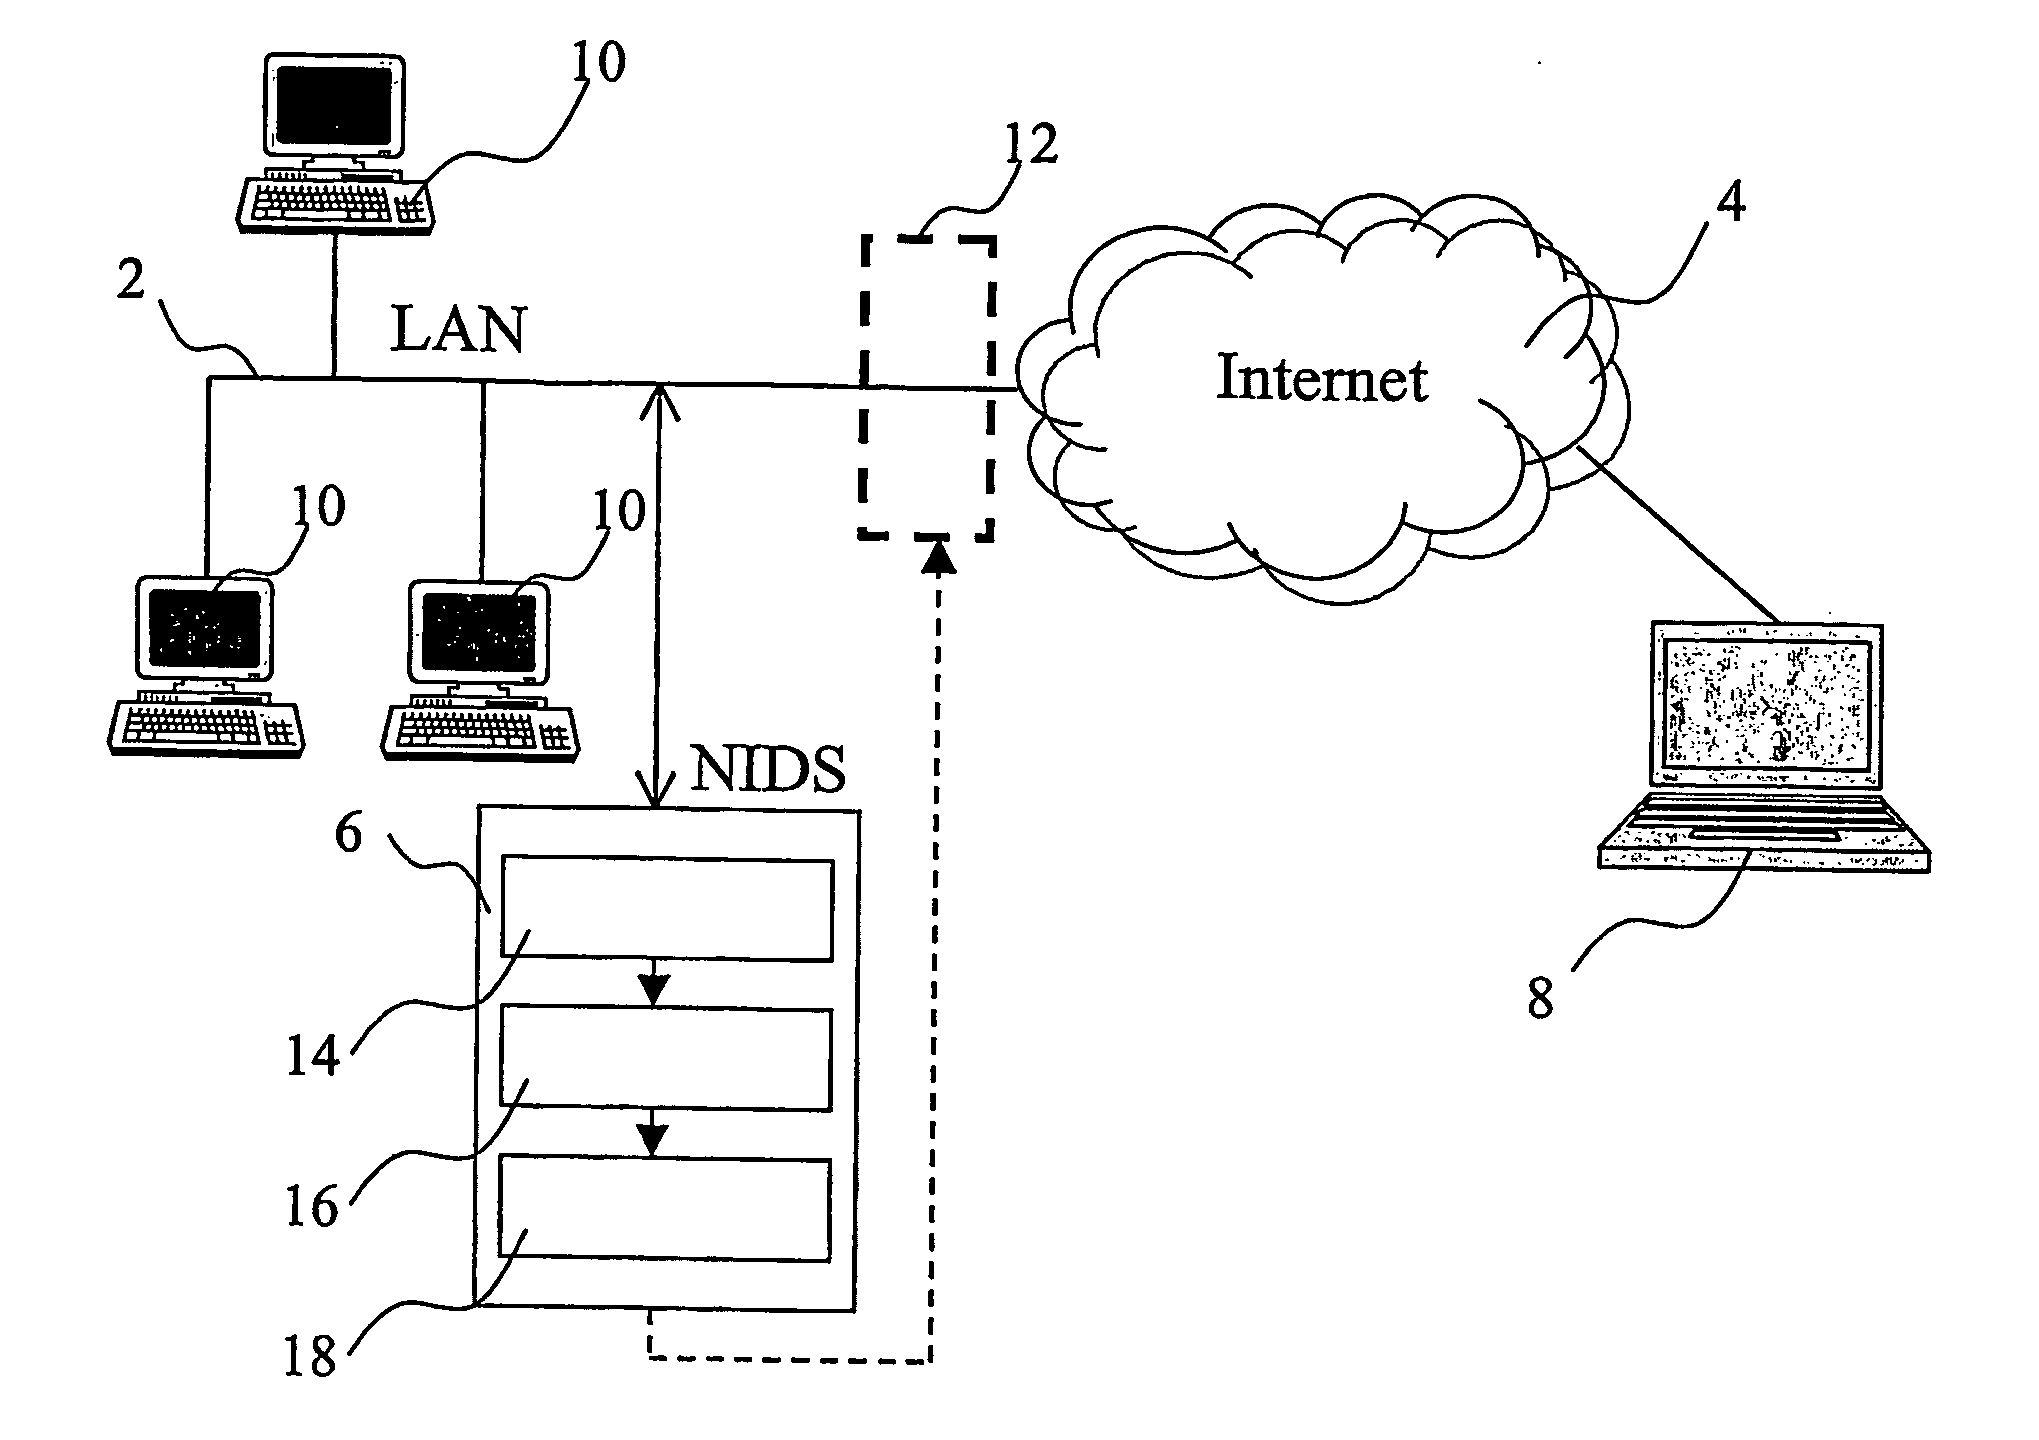 Method and system for detecting unauthorized use of a communication network